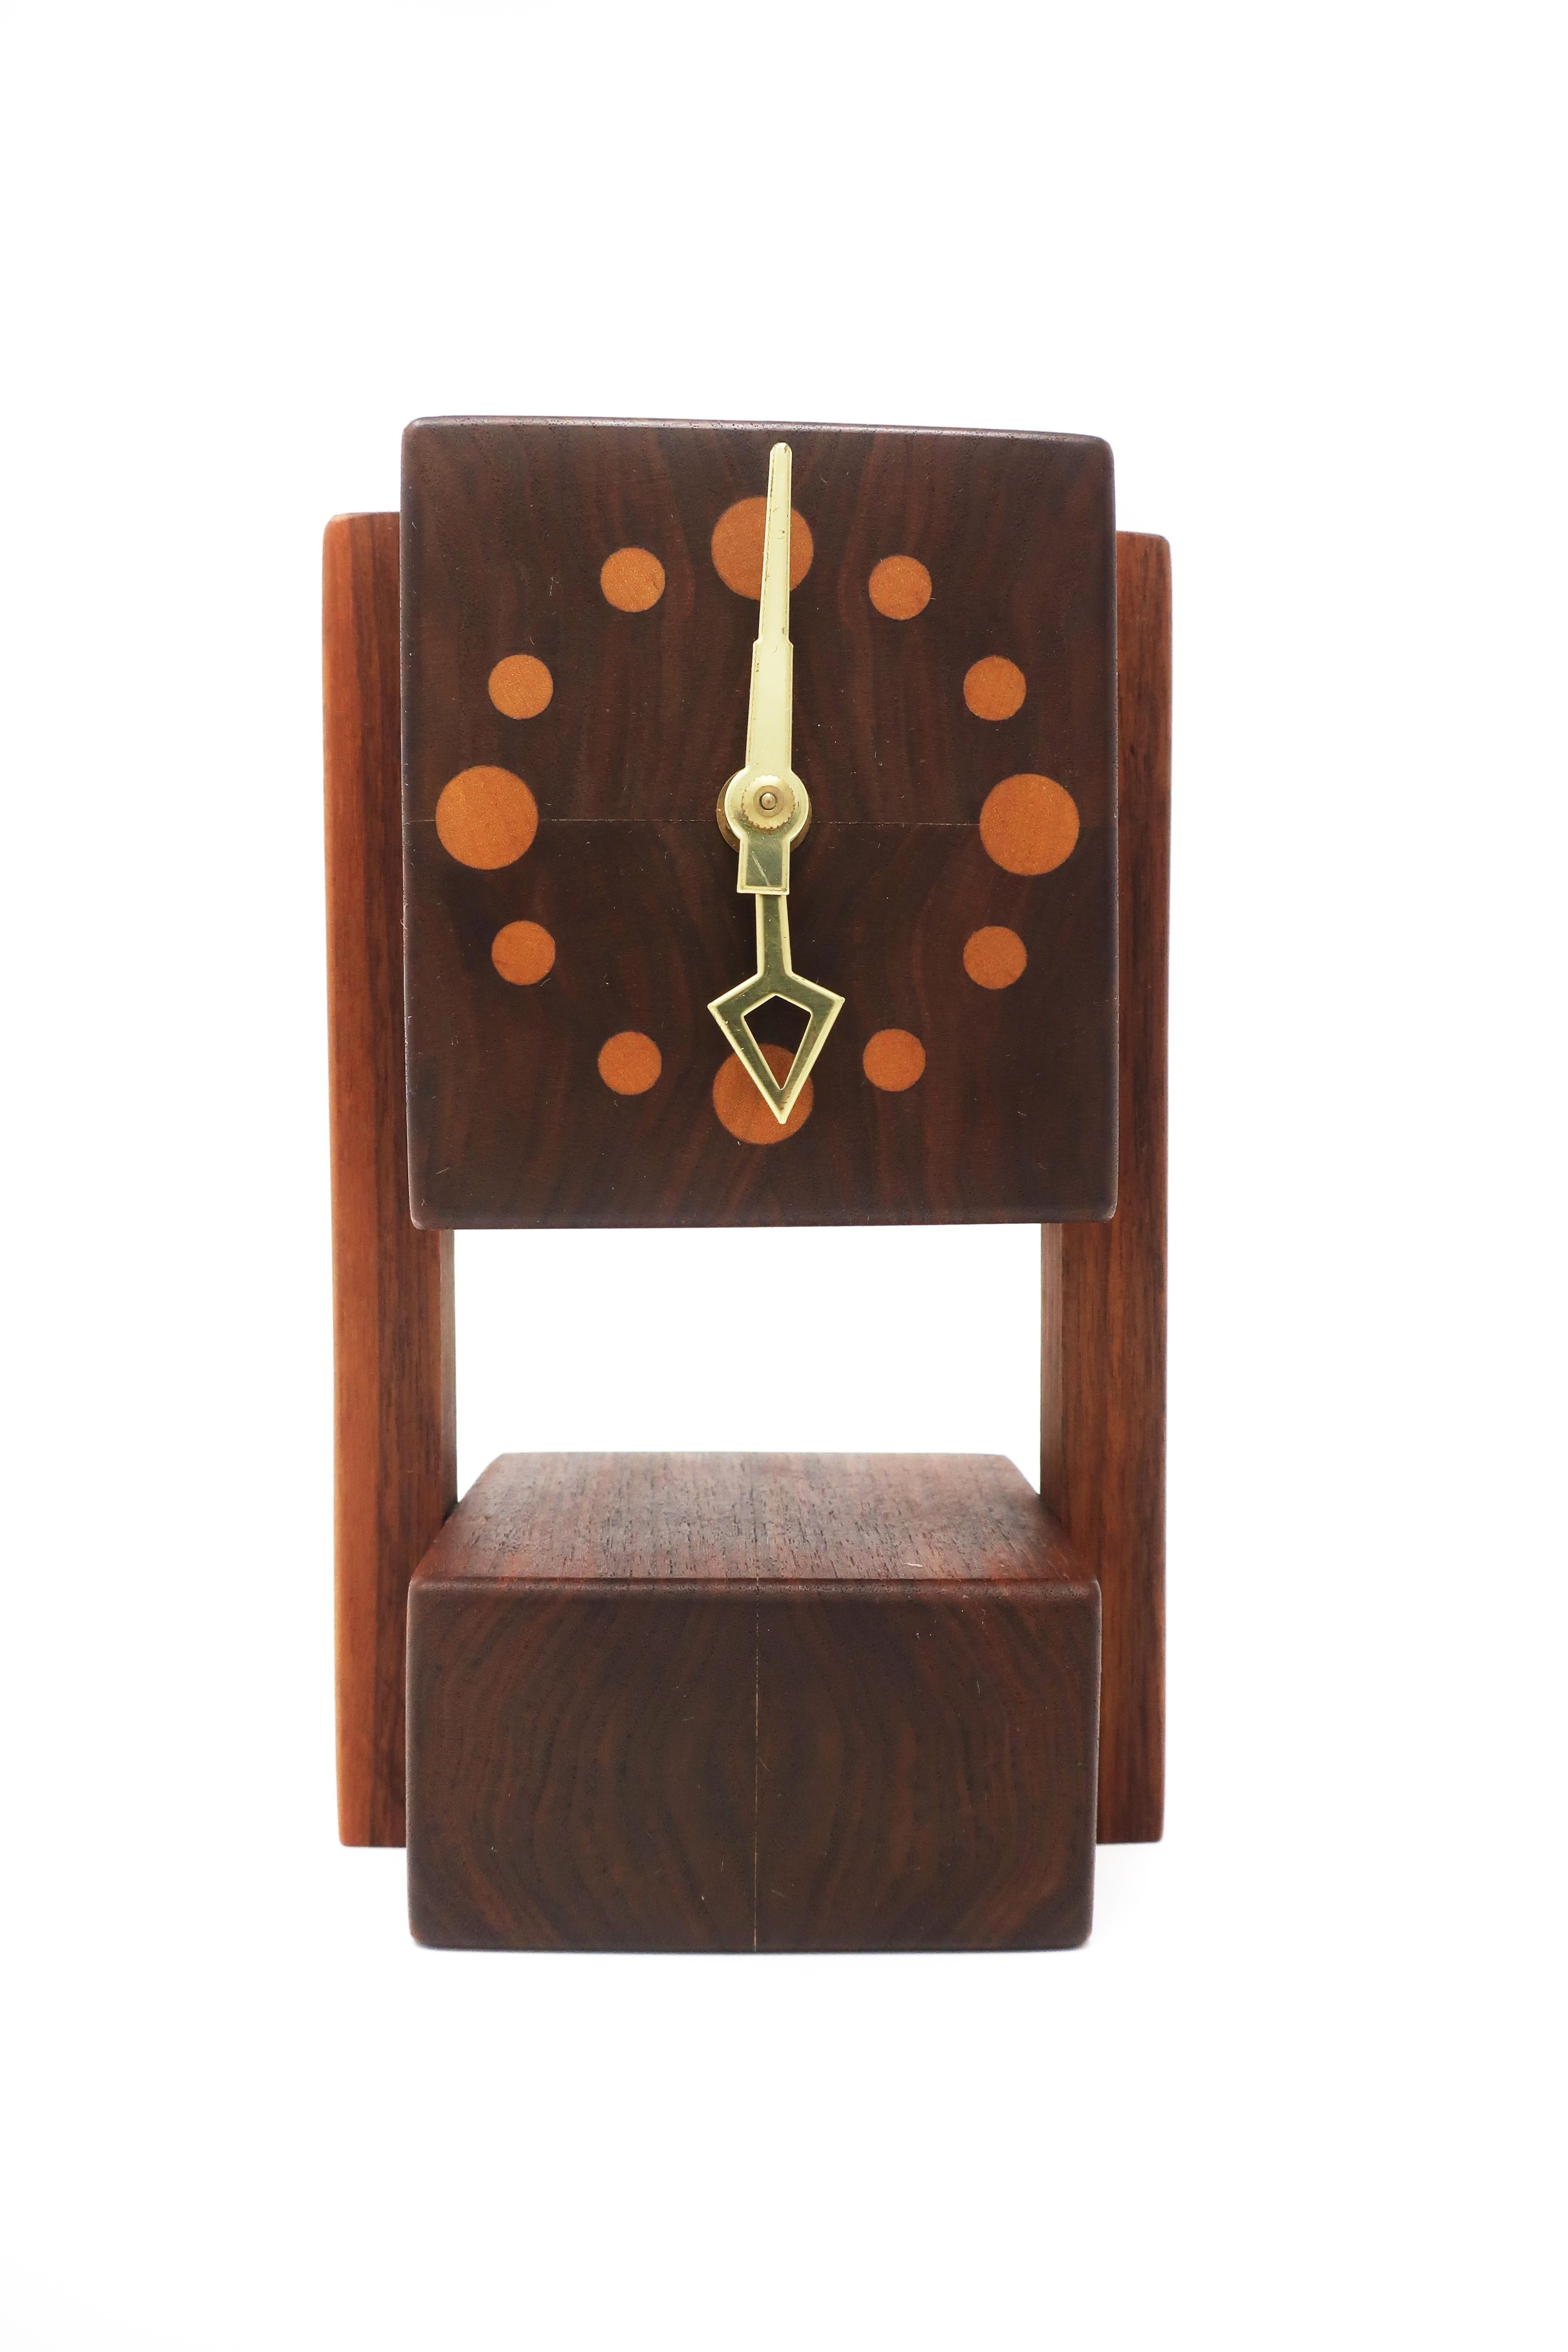 A lovely vintage wooden desk or mantle clock. The base, supports, and housing for the movement are teak, with contrasting lighter wood inset circles serving as the clock’s numbers. Front opens to reveal the clock’s movement.

In very good vintage